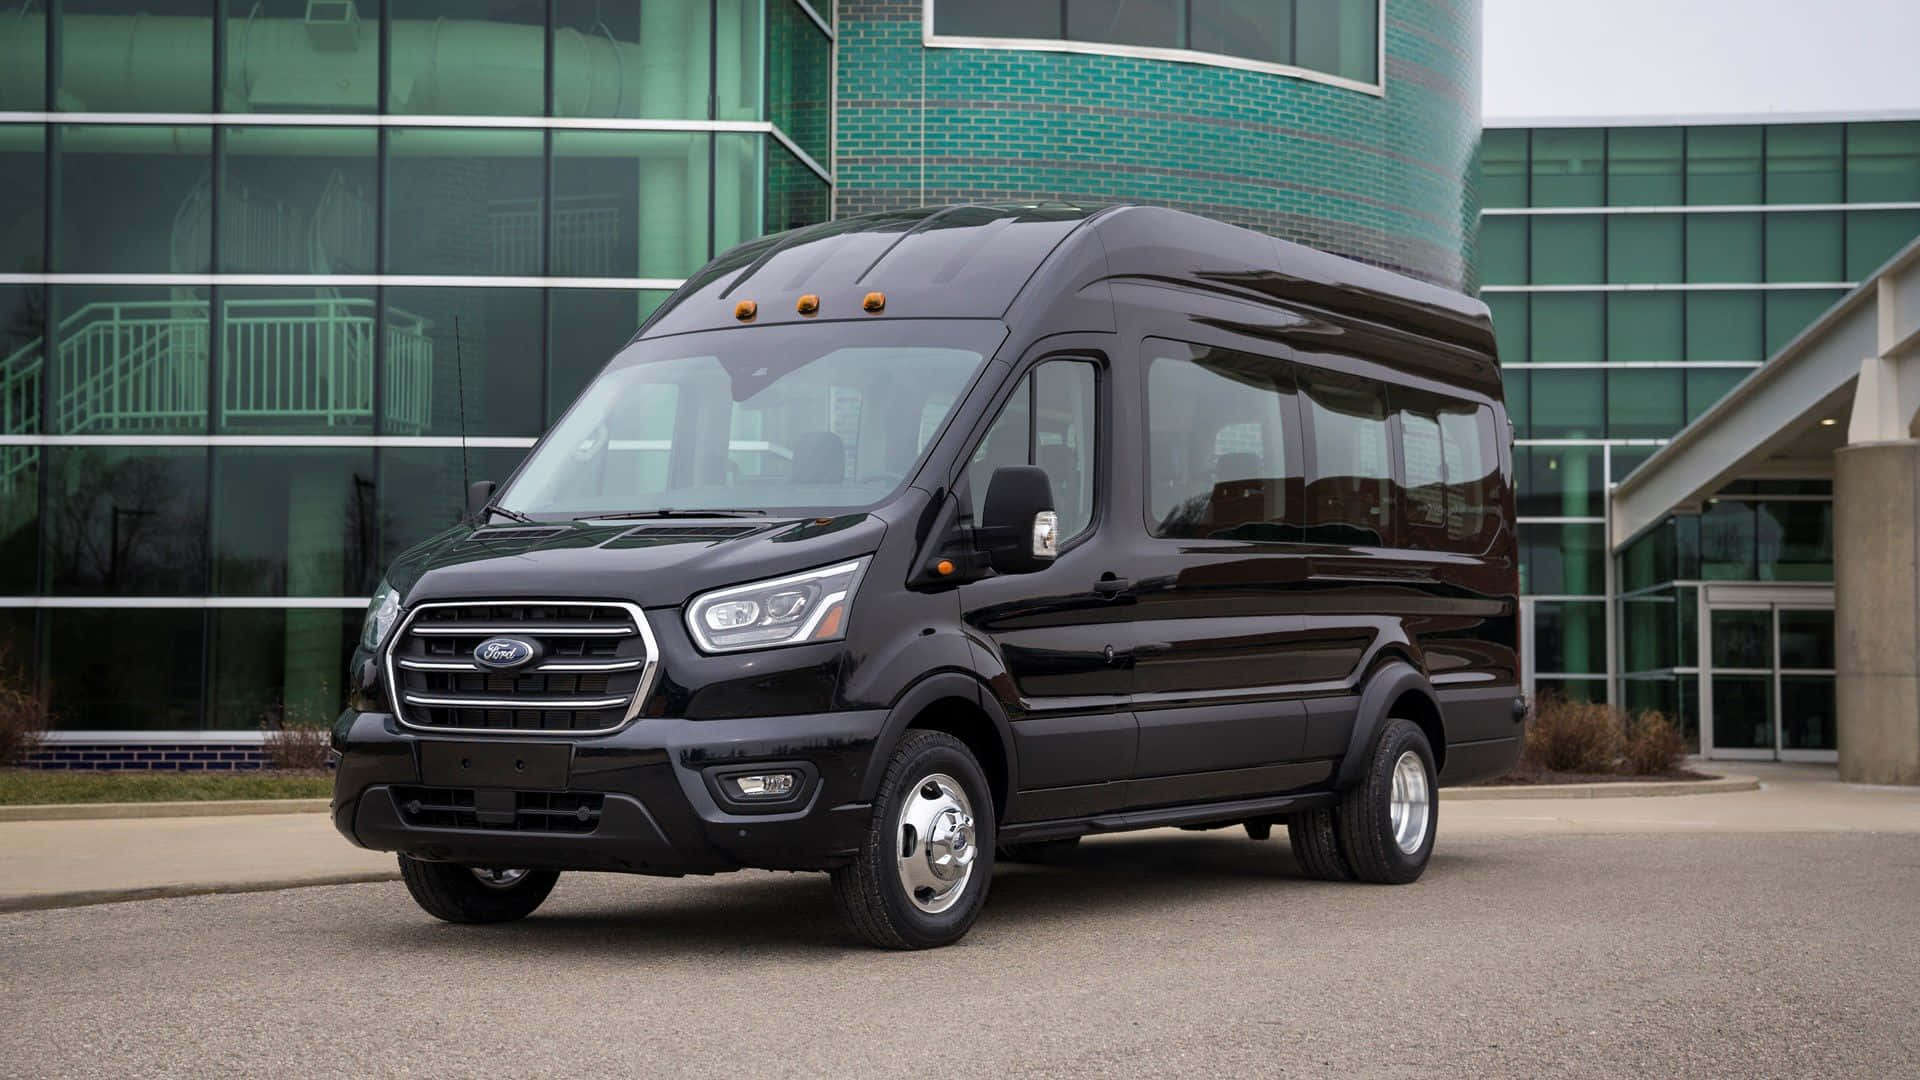 A stylish Ford Transit in motion Wallpaper